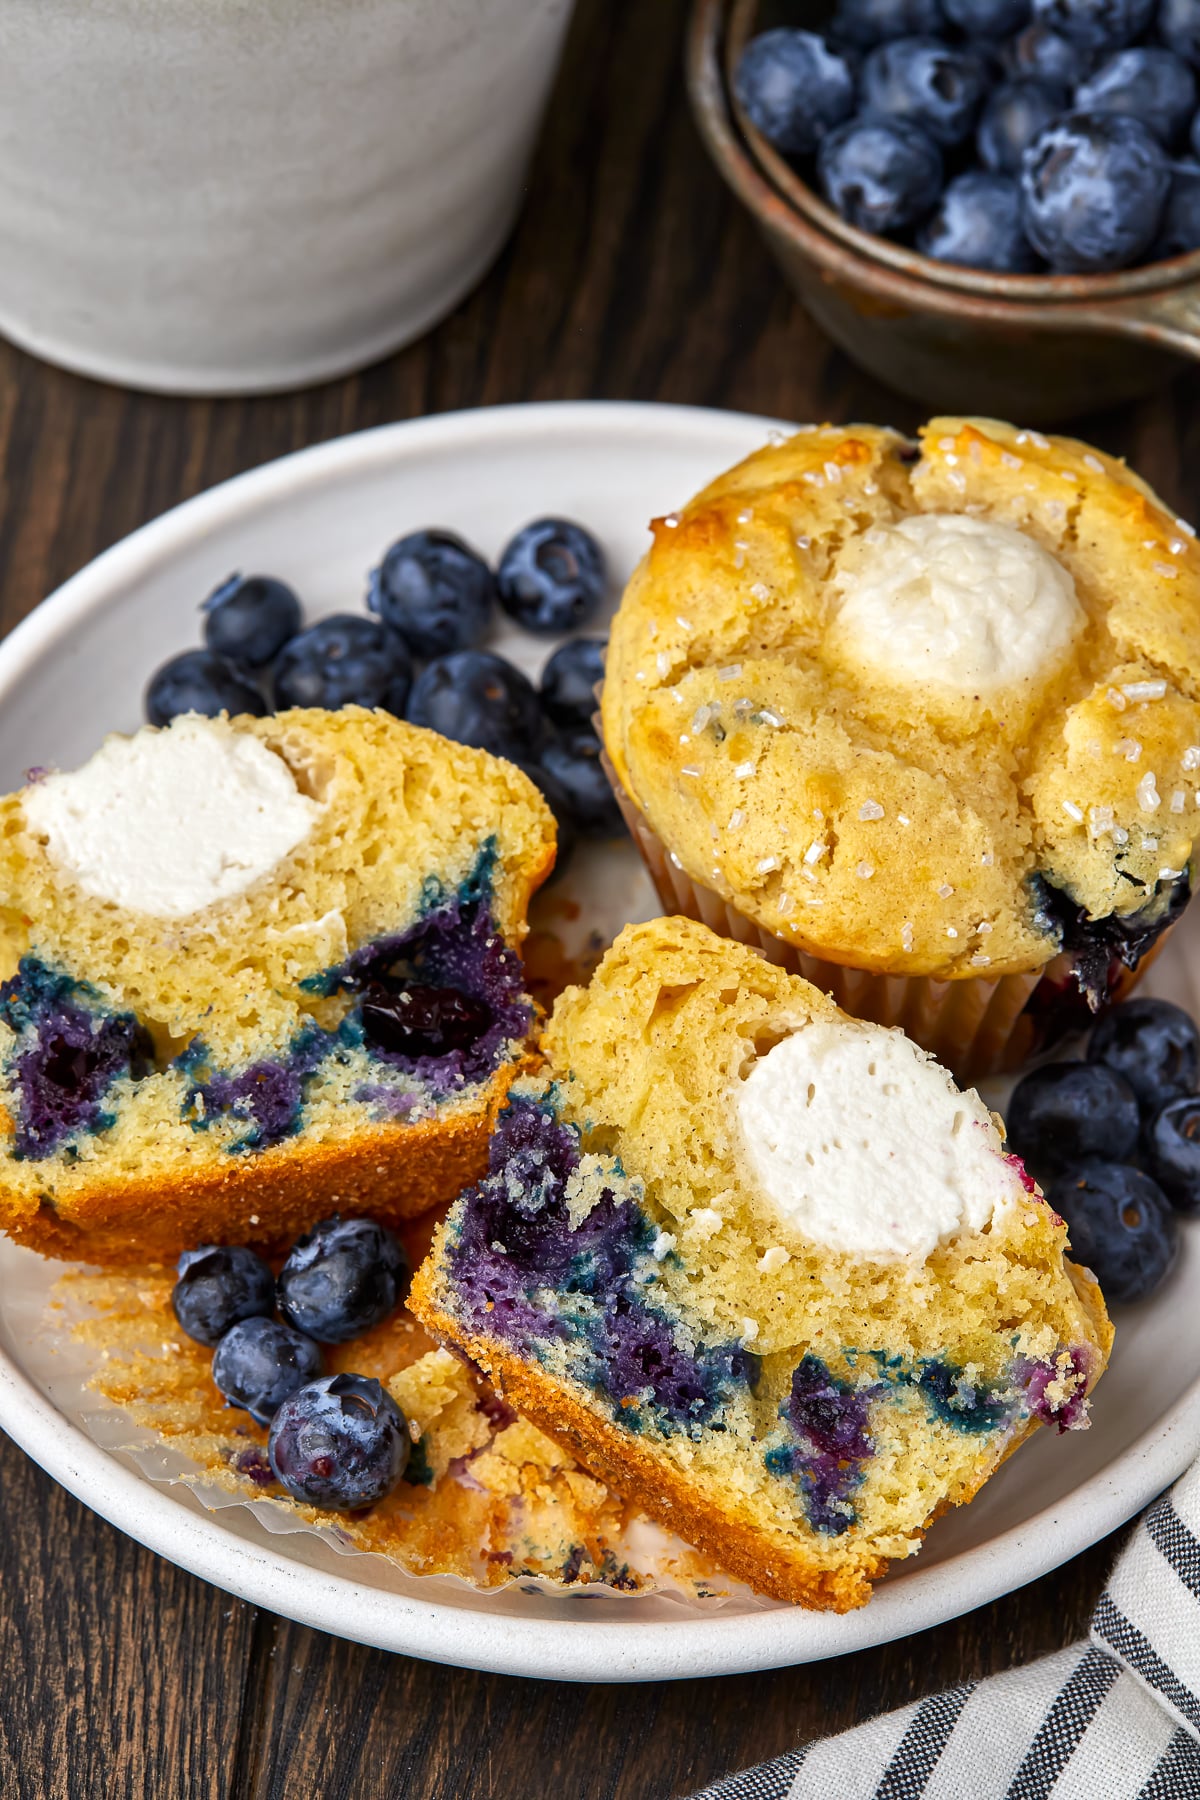 A blueberry cream cheese muffin cut in half to show the filling on a white plate with blueberries on a dark wooden tabletop